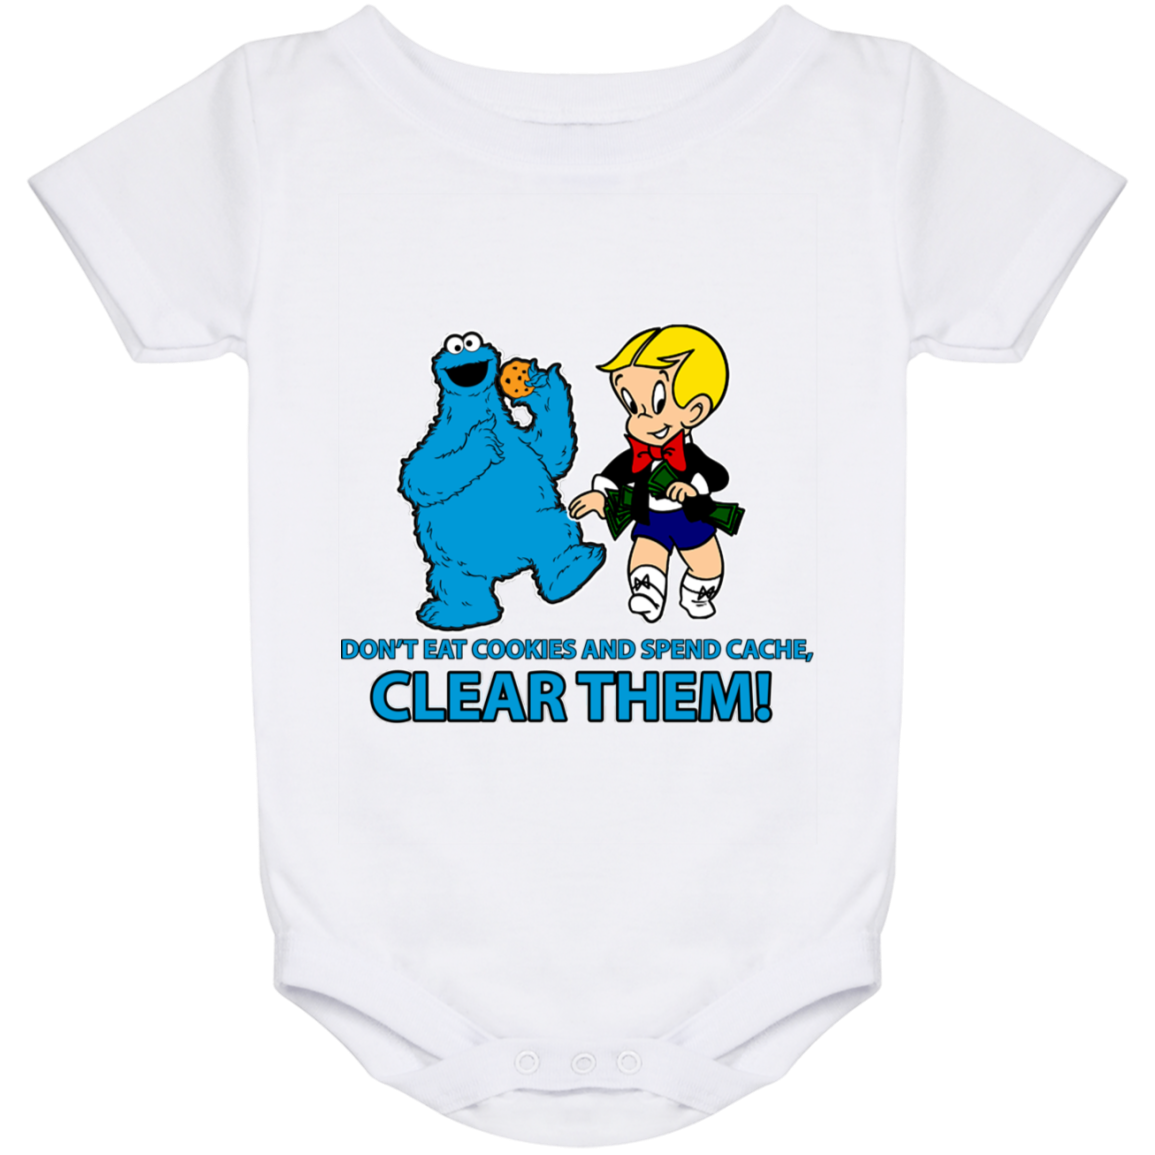 ArtichokeUSA Custom Design. Don't Eat Cookies And Spend Cache! Delete Them! Cookie Monster and Richie Rich Fan Art/Parody. Baby Onesie 24 Month